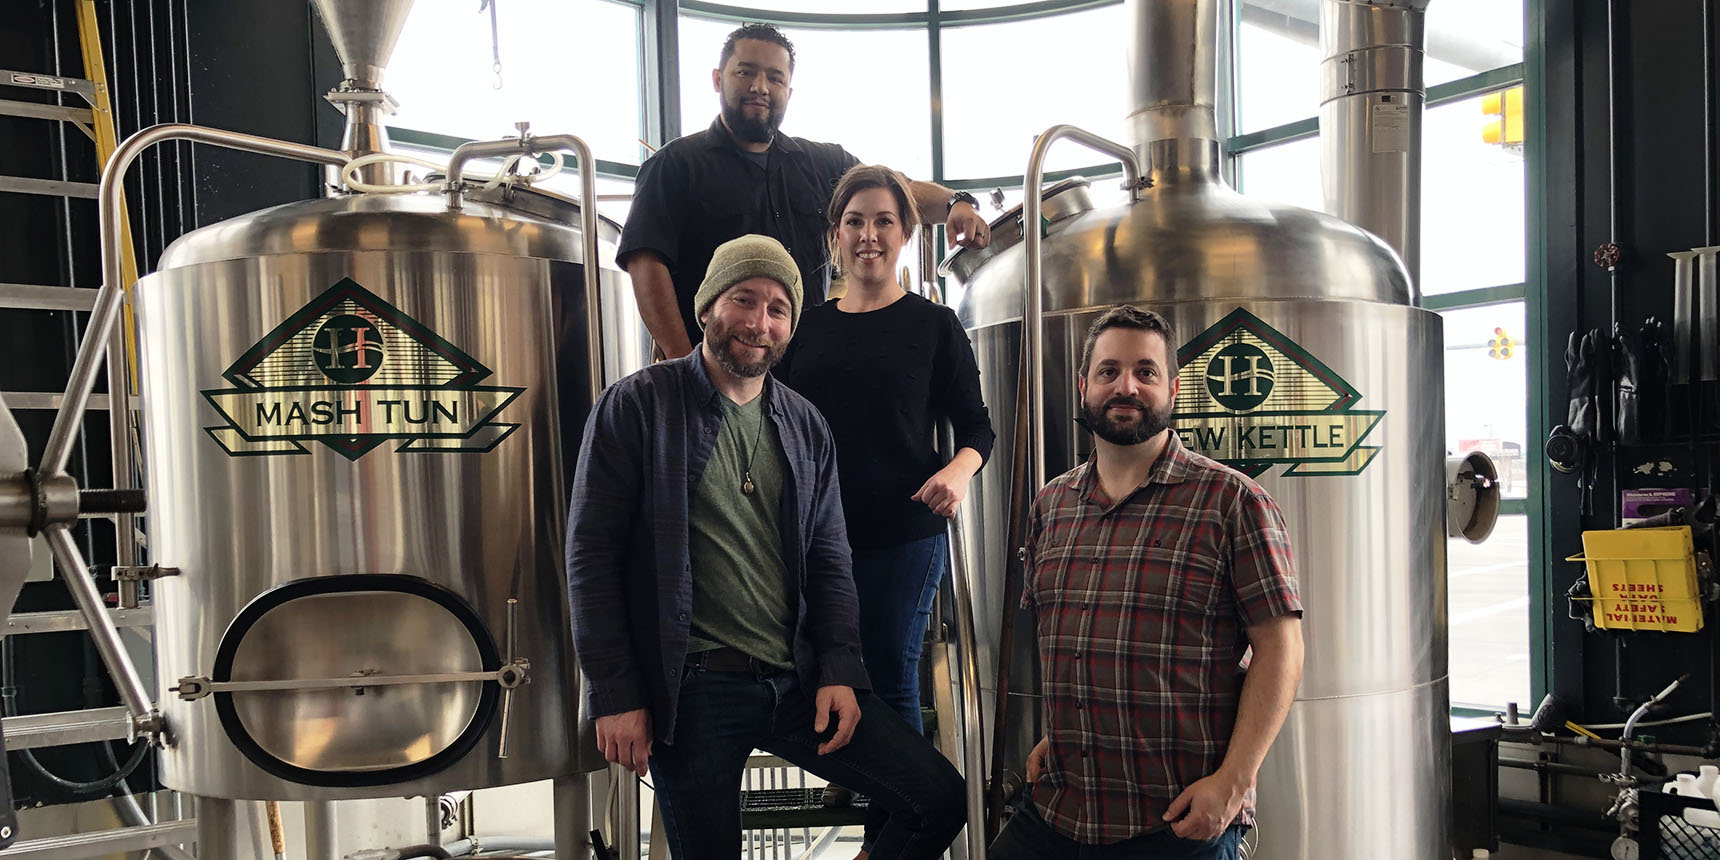 From left, Brock Blonquist, general manager; Richard Rodriguez, brewer; Natalie Rogers, marketing director; and Donovan Steele, head brewer.